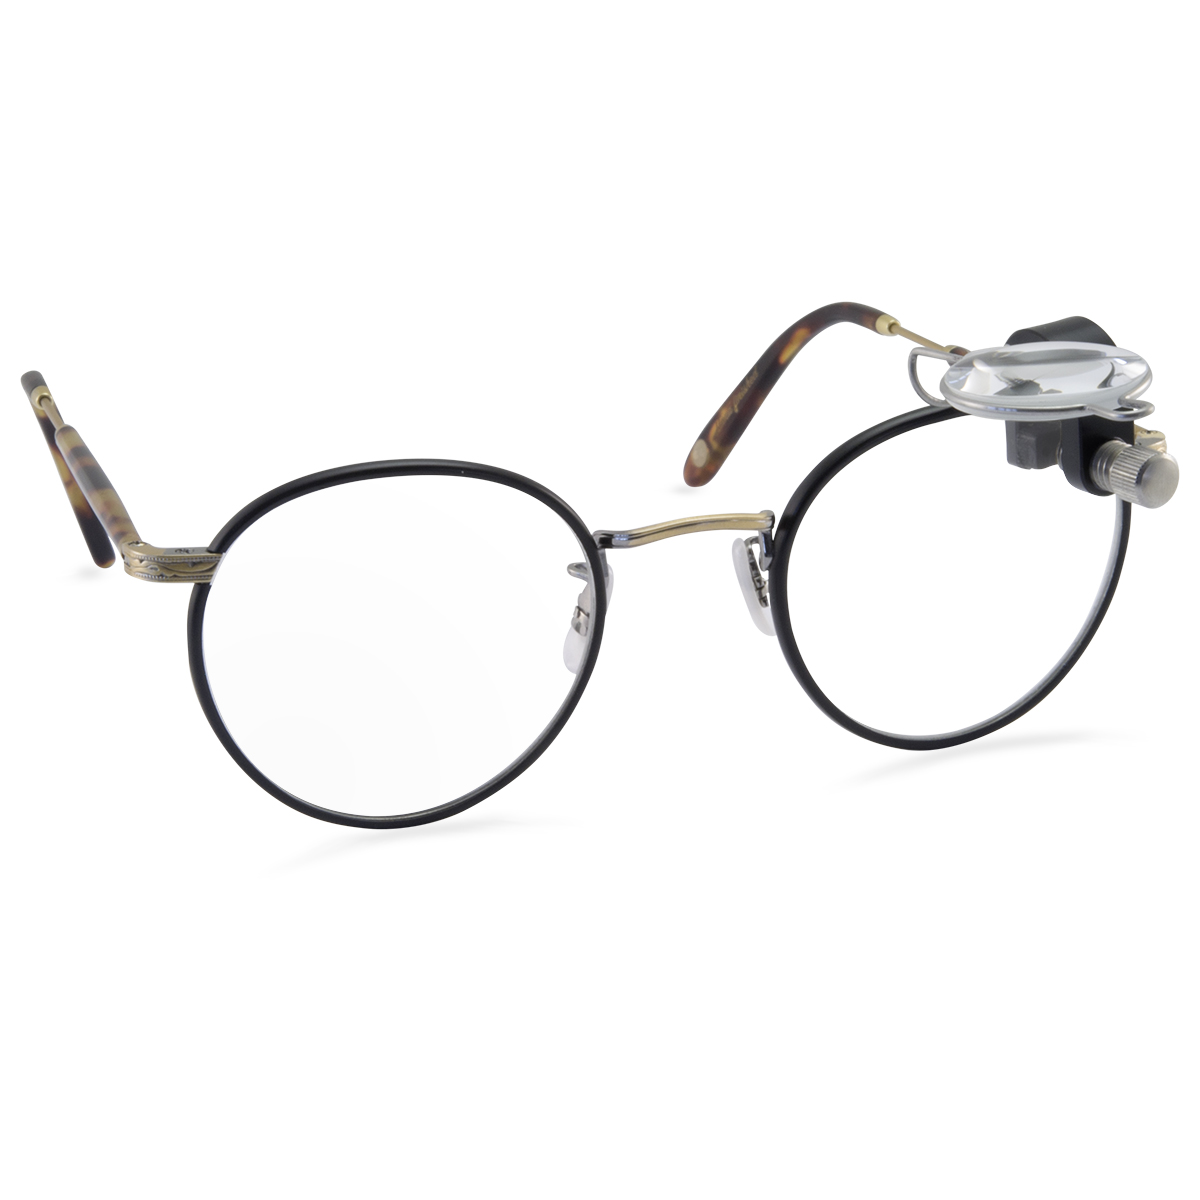 Magnifying glass for spectacles, 10x, right